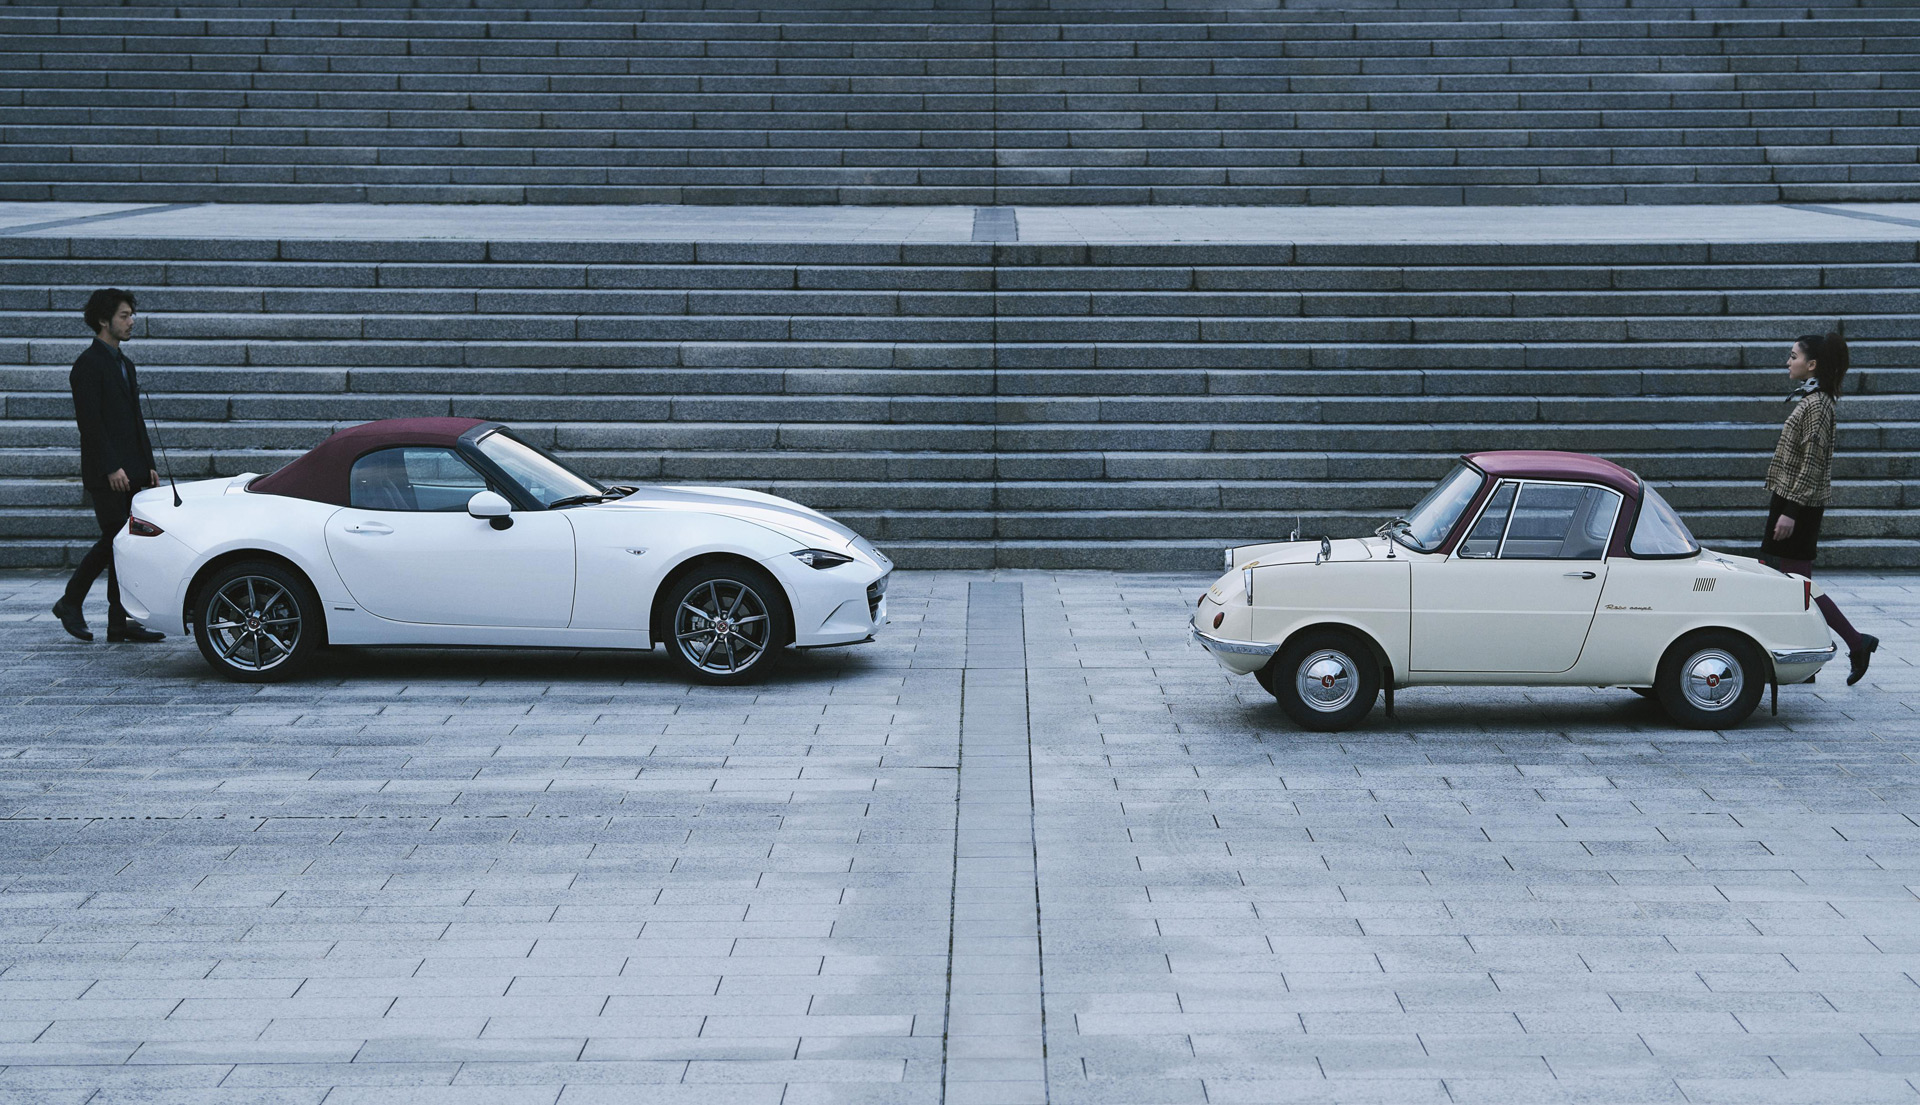 100th Anniversary Special Edition Mazda Mx 5 Miata Celebrates A Century Of Business 60 Years Of Cars